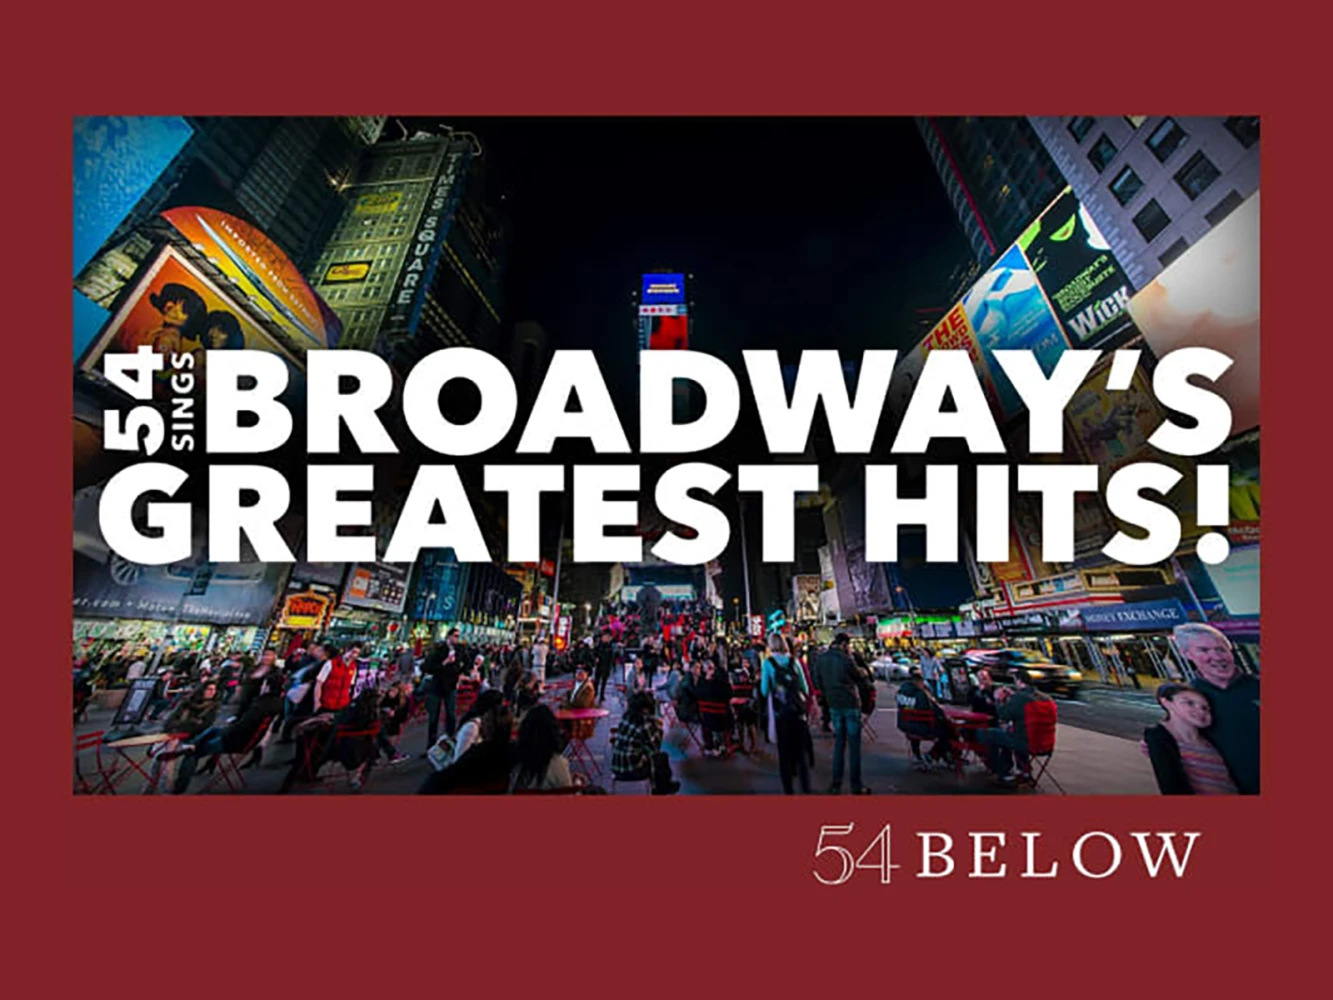 54 Sings Broadway's Greatest Hits!: What to expect - 1